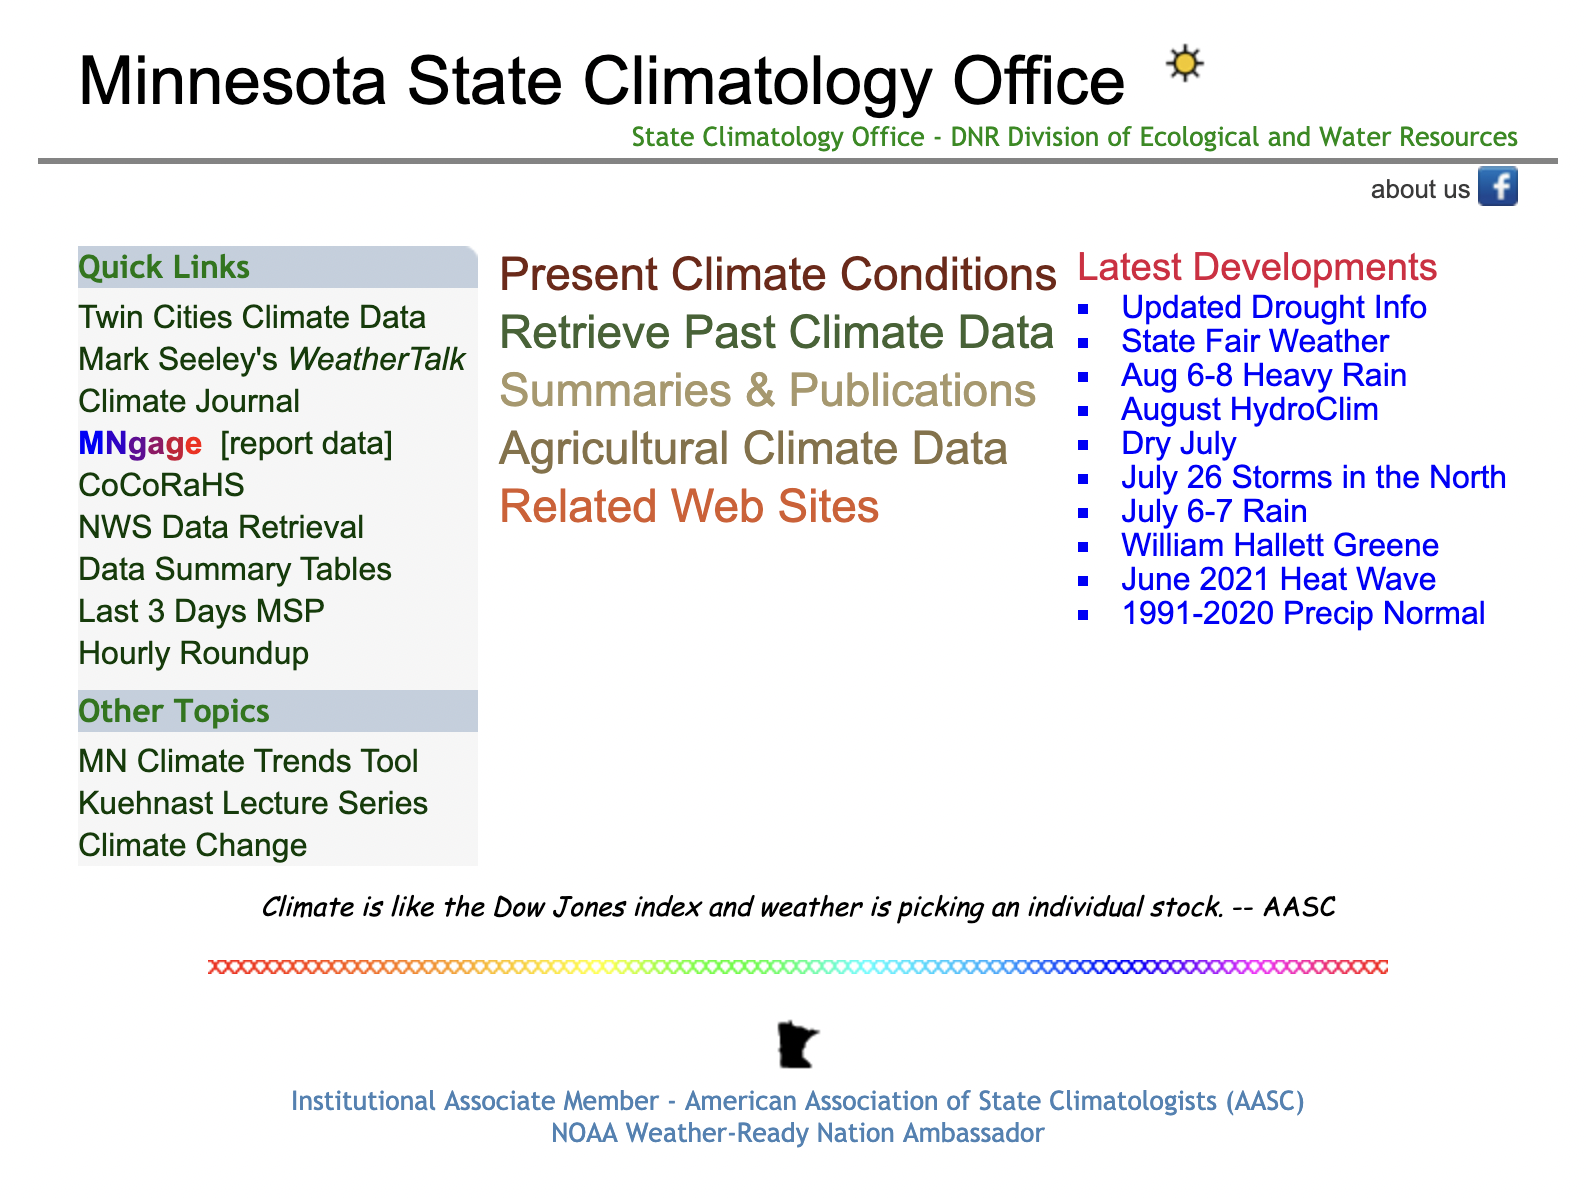 Image showing the most recent climatology office website